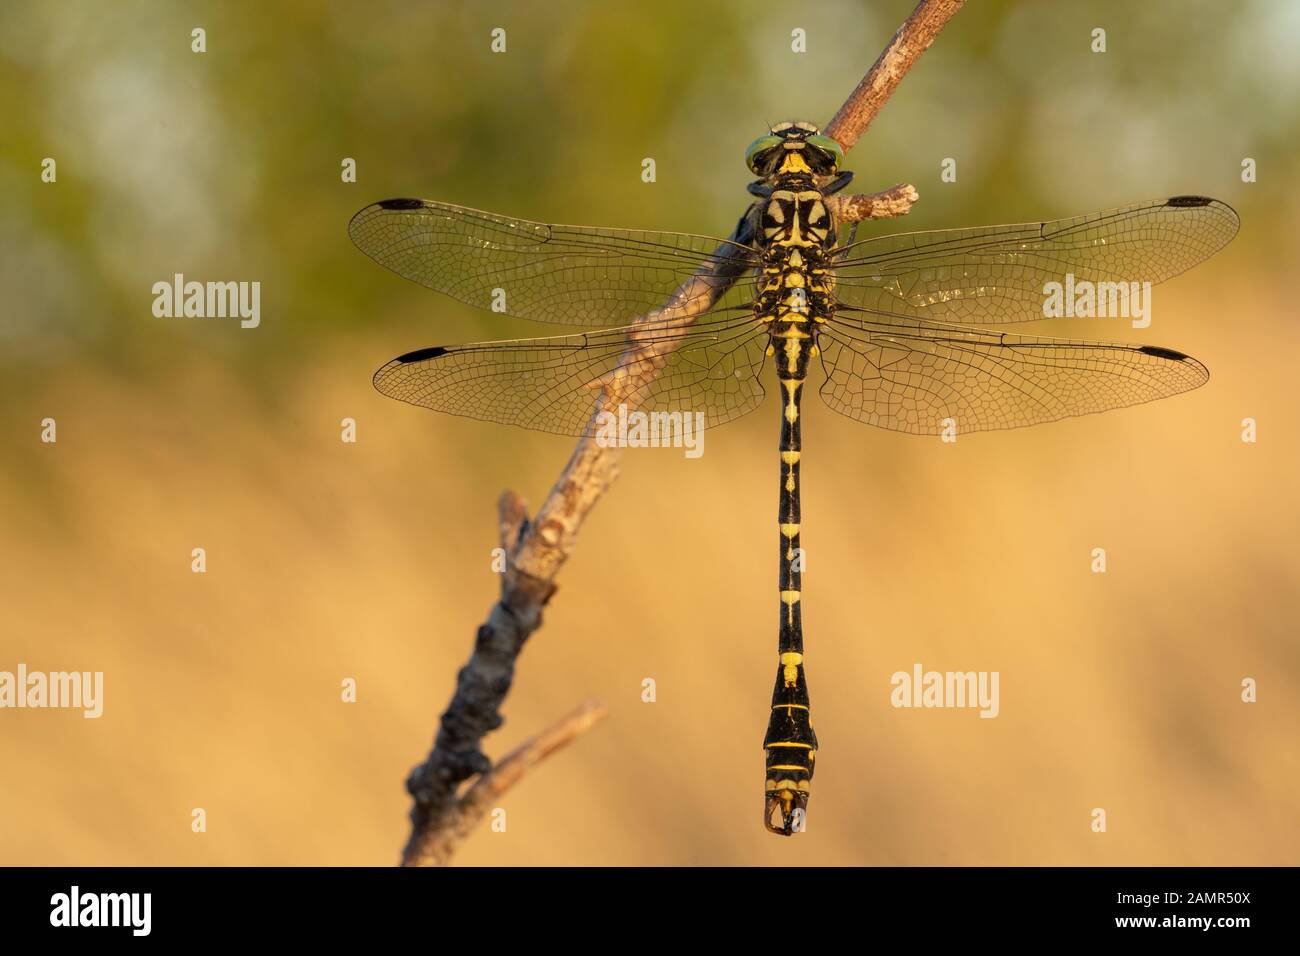 The small pincertail or green-eyed hook-tailed dragonfly Onychogomphus forcipatus in Czech Republic Stock Photo